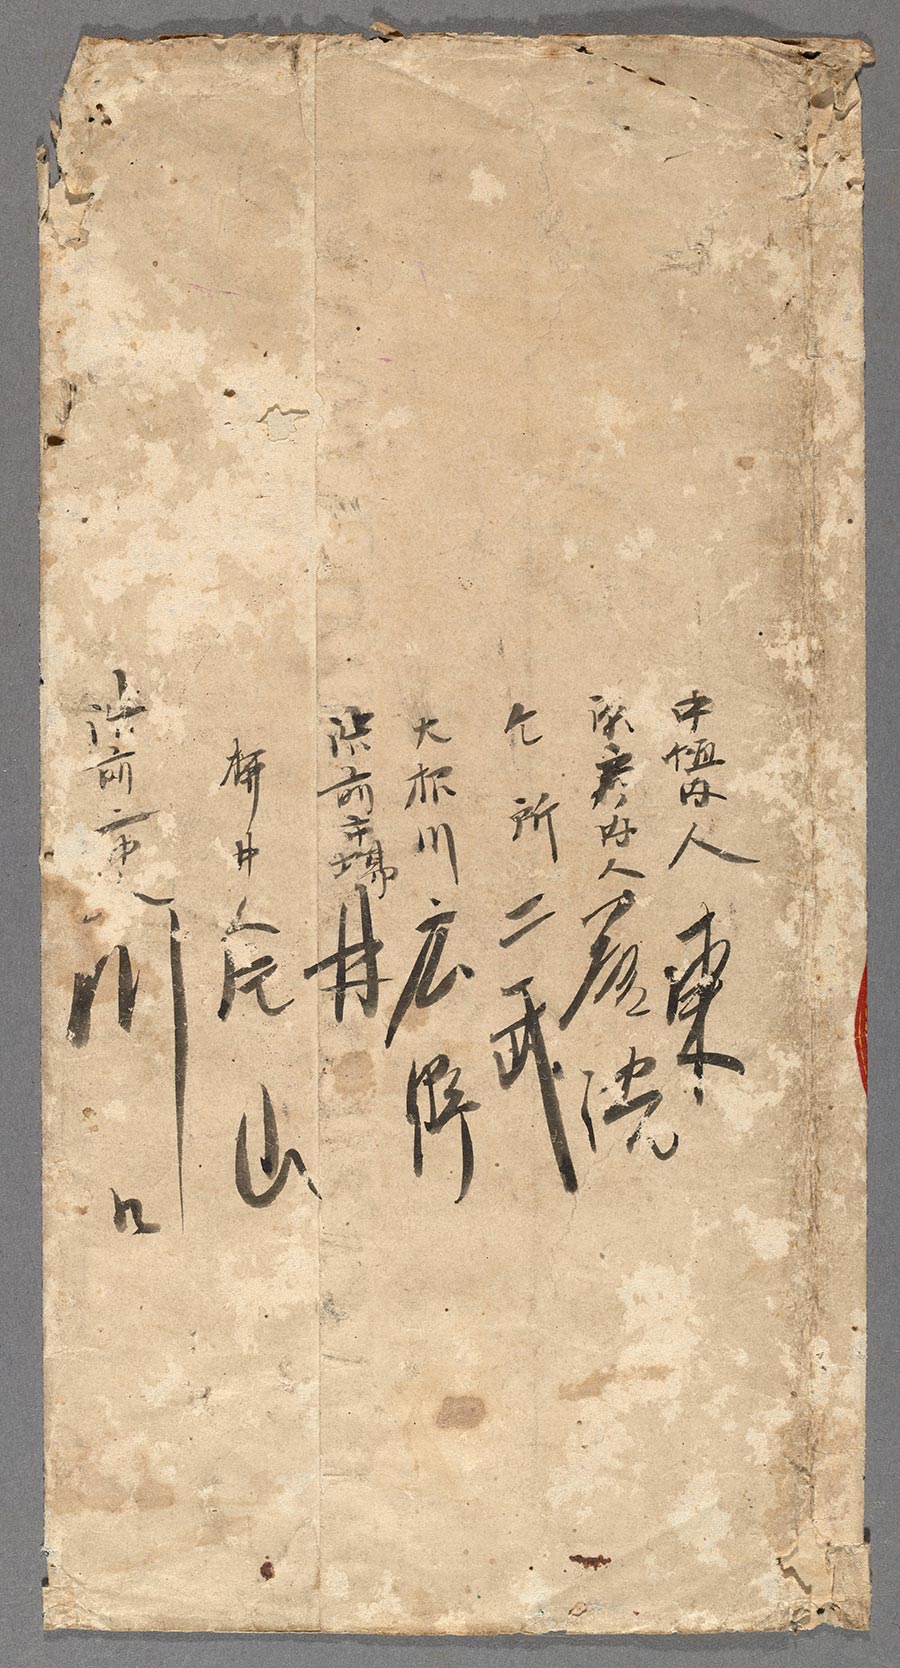 Japanese writing on the cover of a Honolulu map.